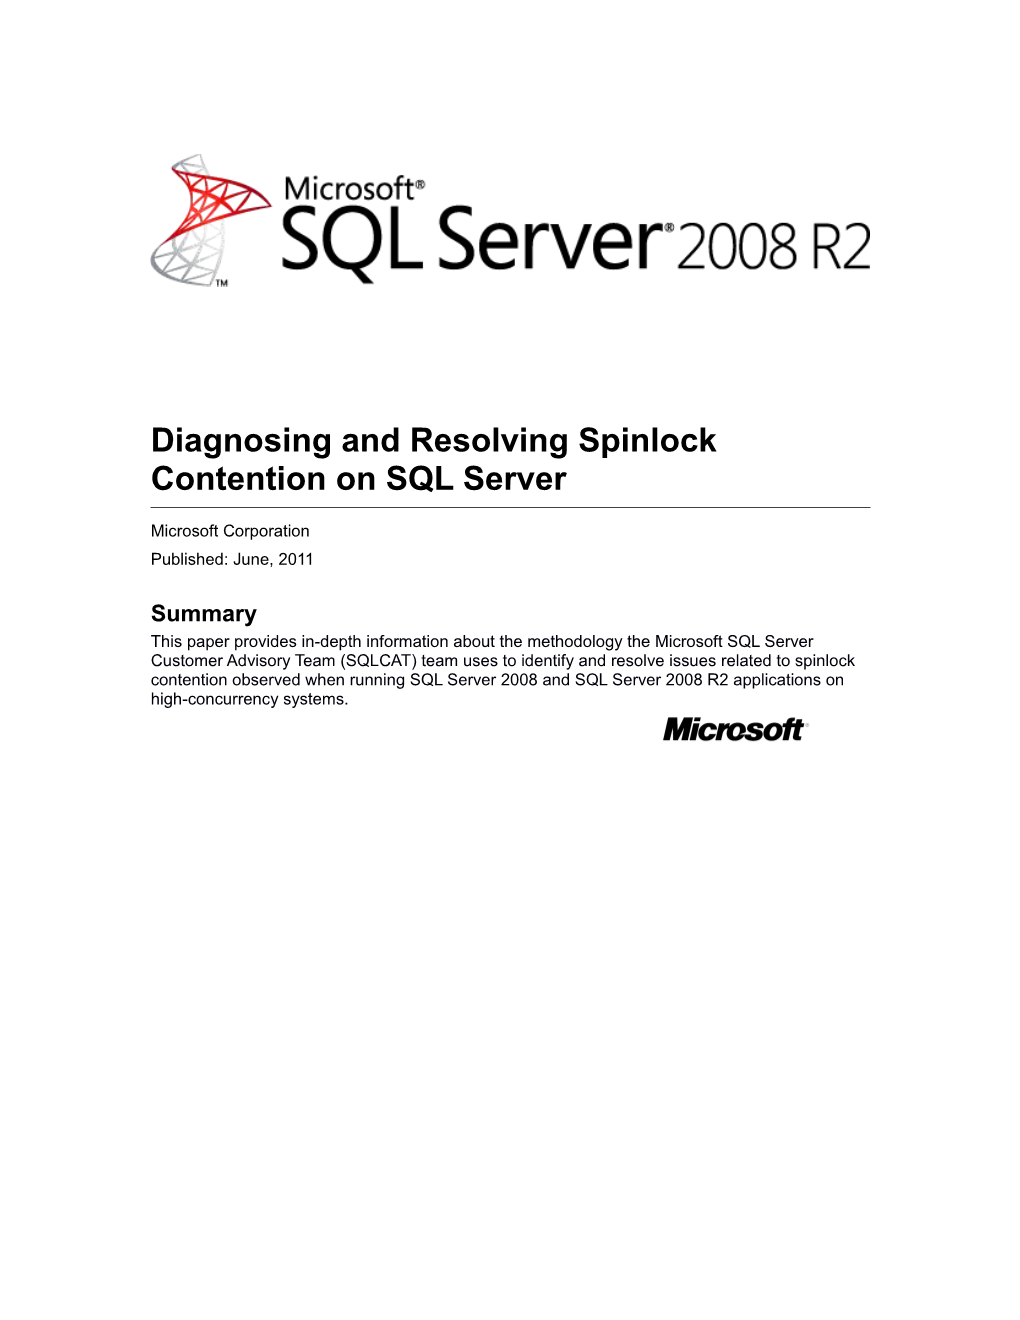 Diagnosing and Resolving Spinlock Contention on SQL Server